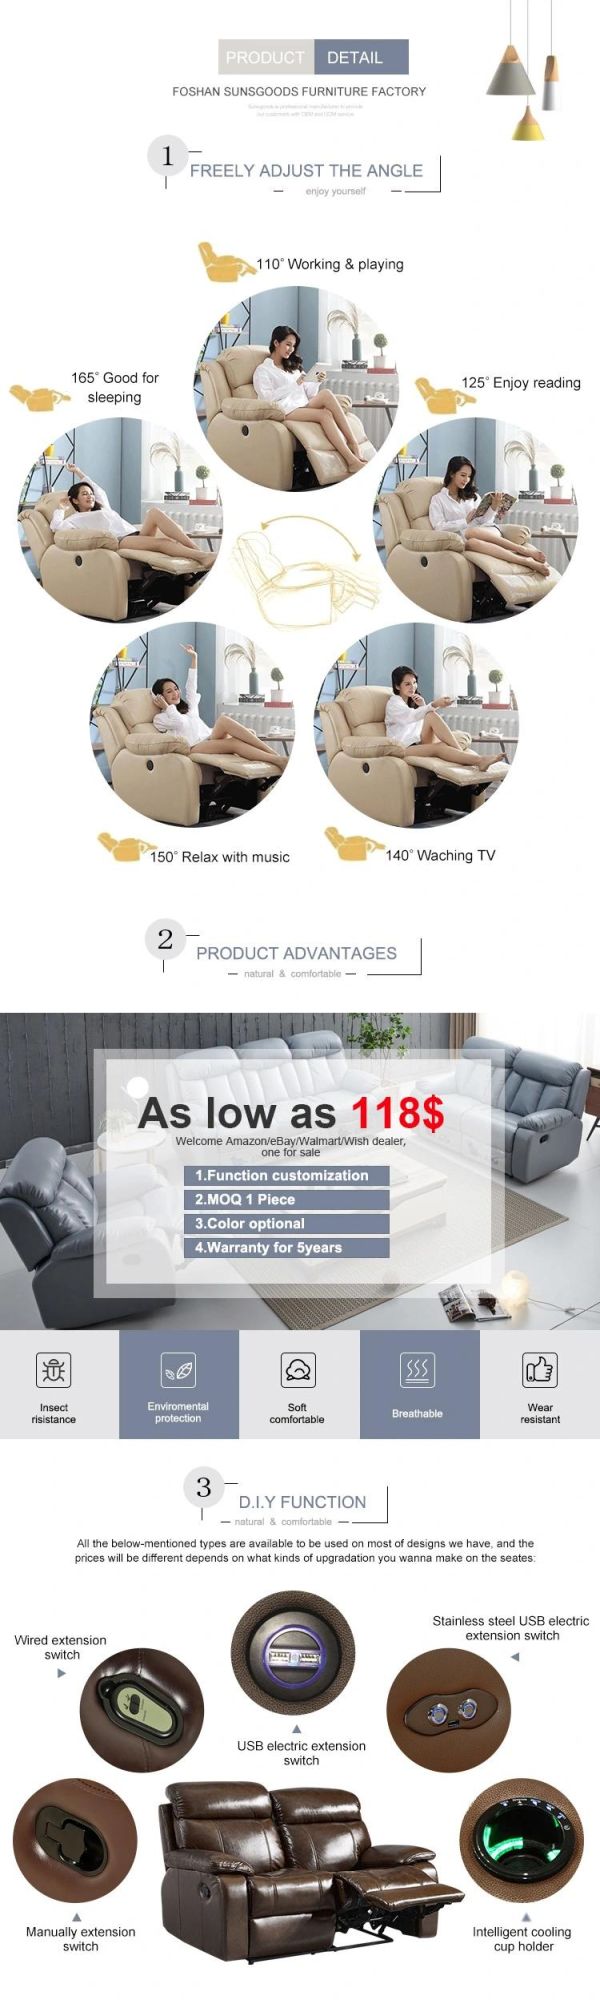 Home Theater Reclining Movie Theater Standard Single Sofa Chair